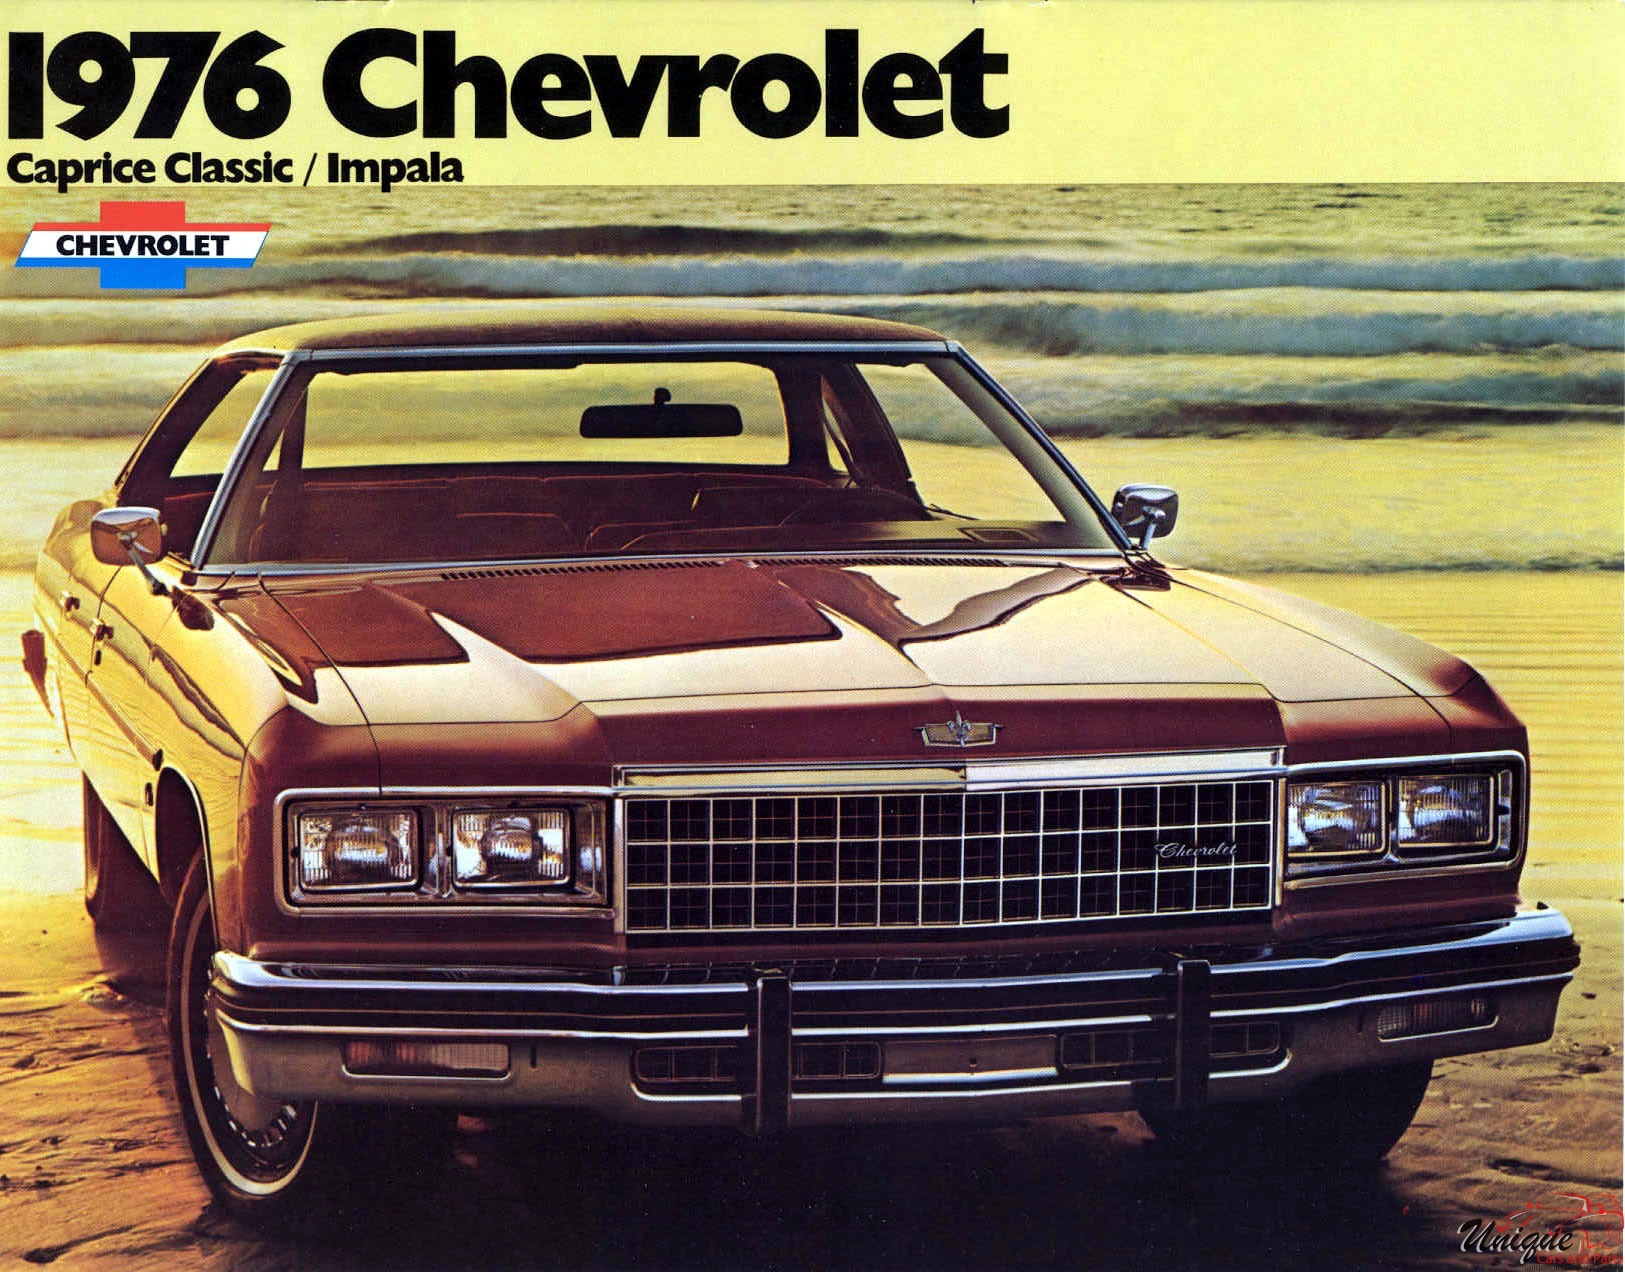 1976 Chevrolet Brochure Page 5